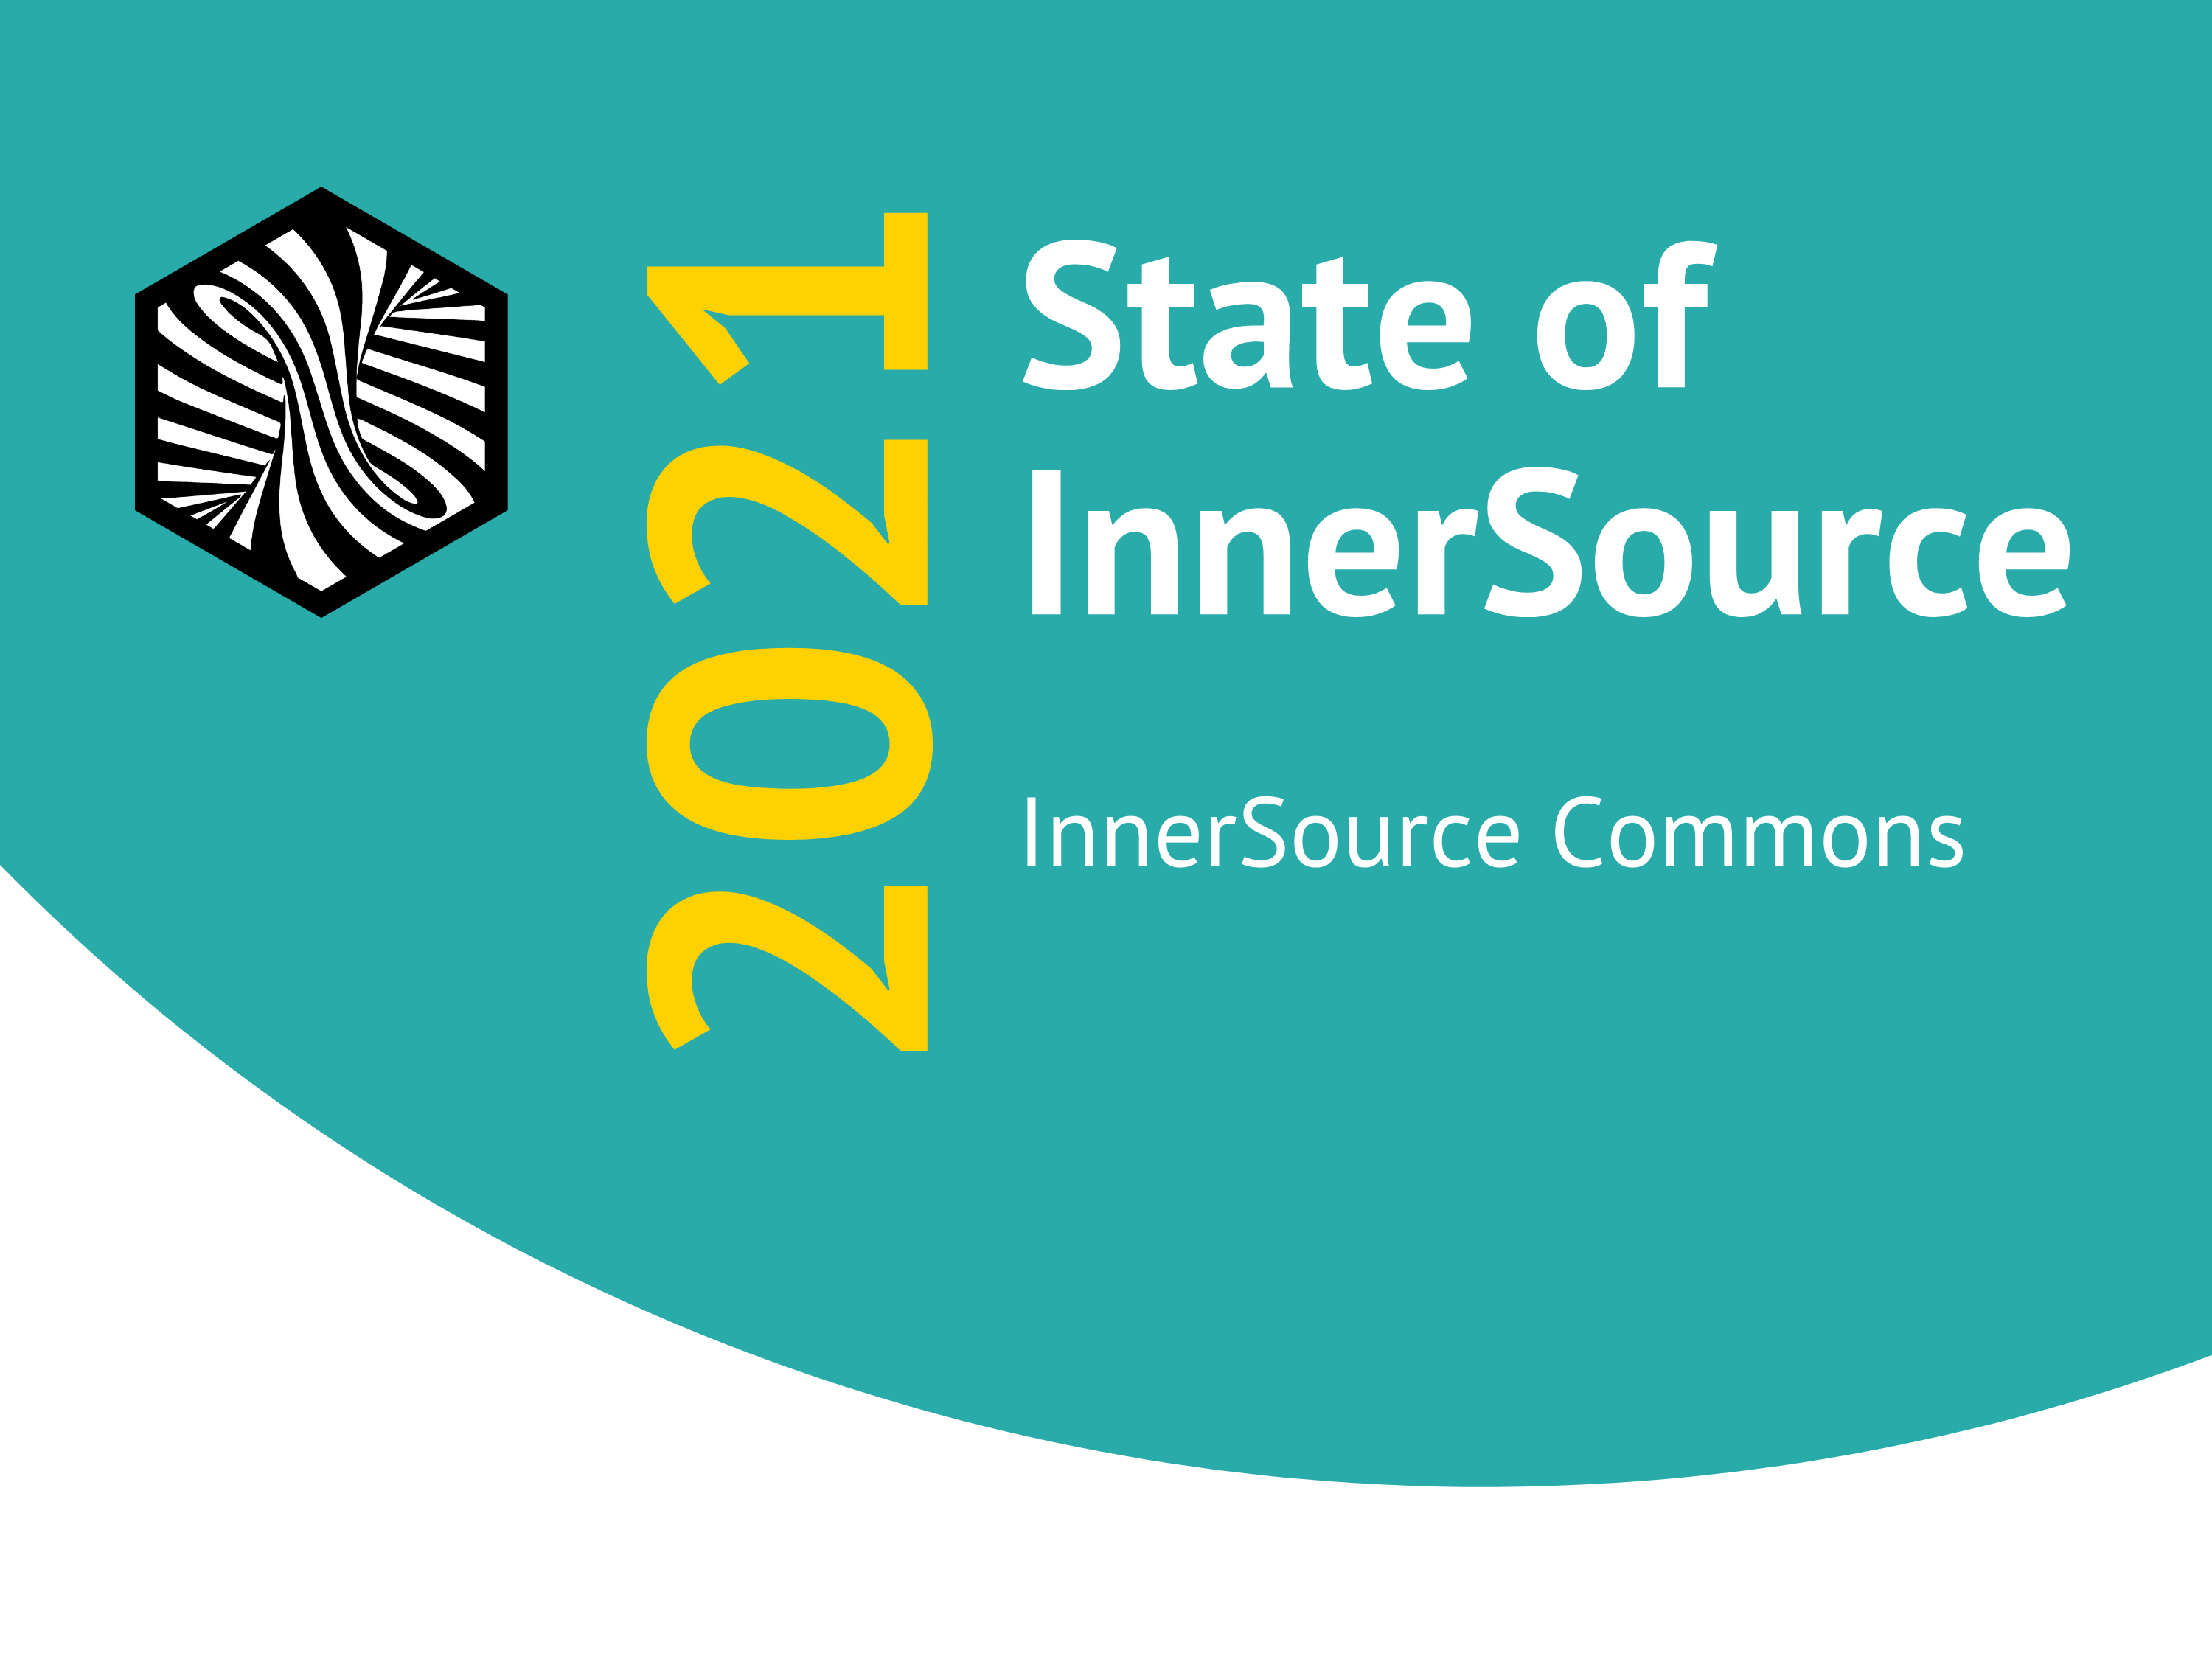 State of InnerSource Survey 2021